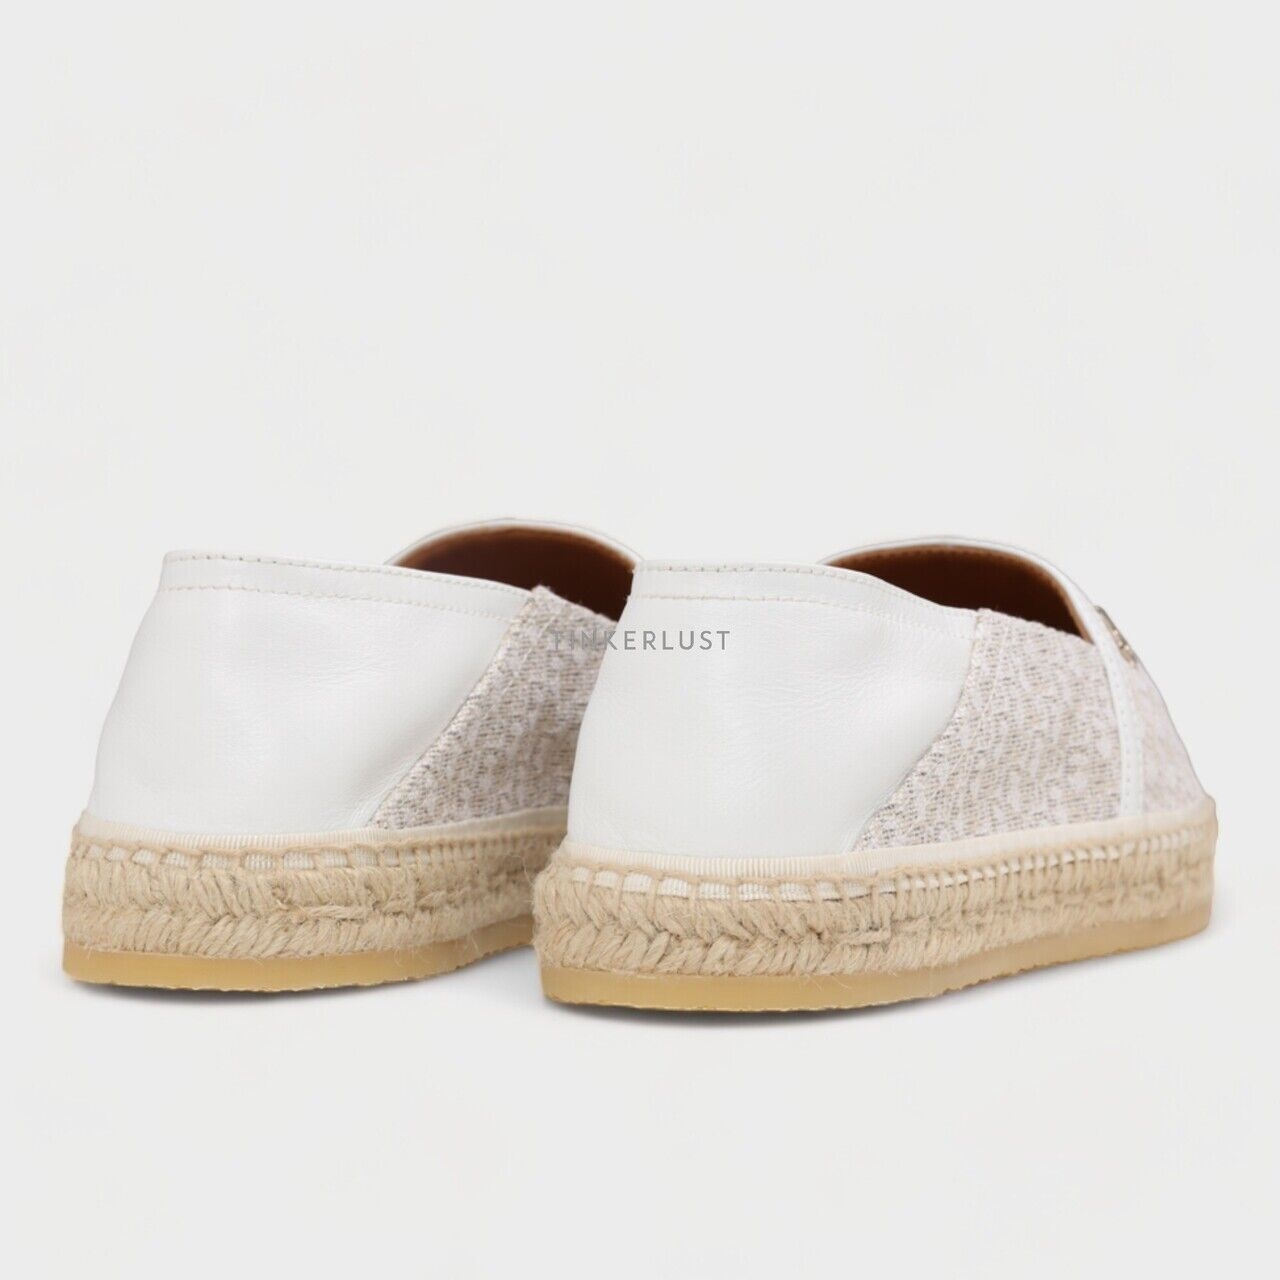 Christian Dior Paradise Oblique Espadrille in Off White Flats